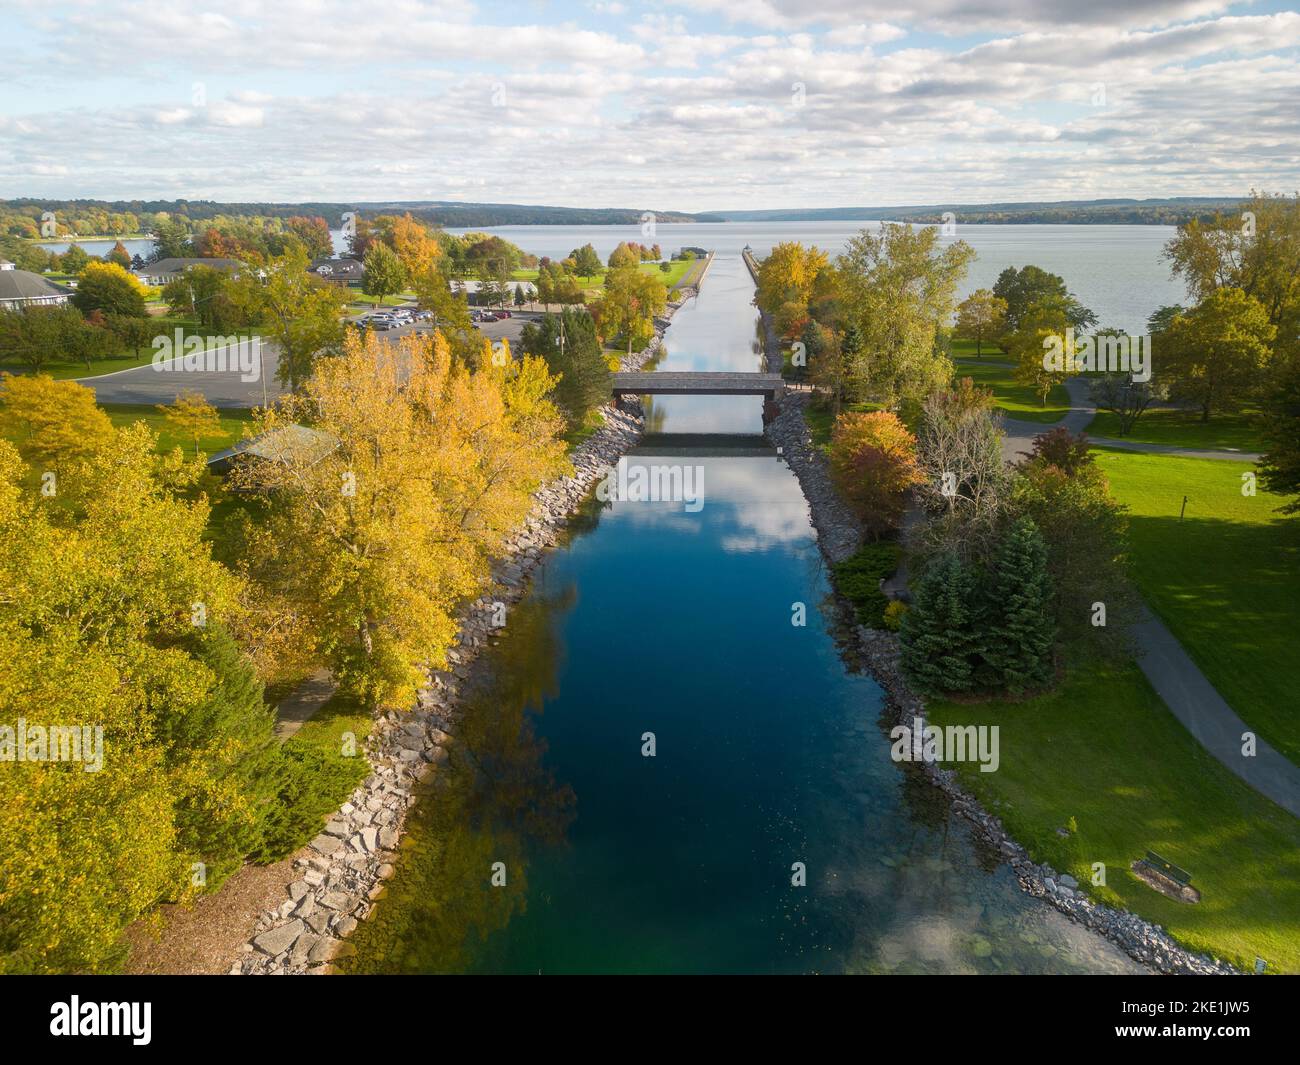 An aerial shot of the scenic Emerson Park in Auburn New York with flowing water and green vegetation Stock Photo